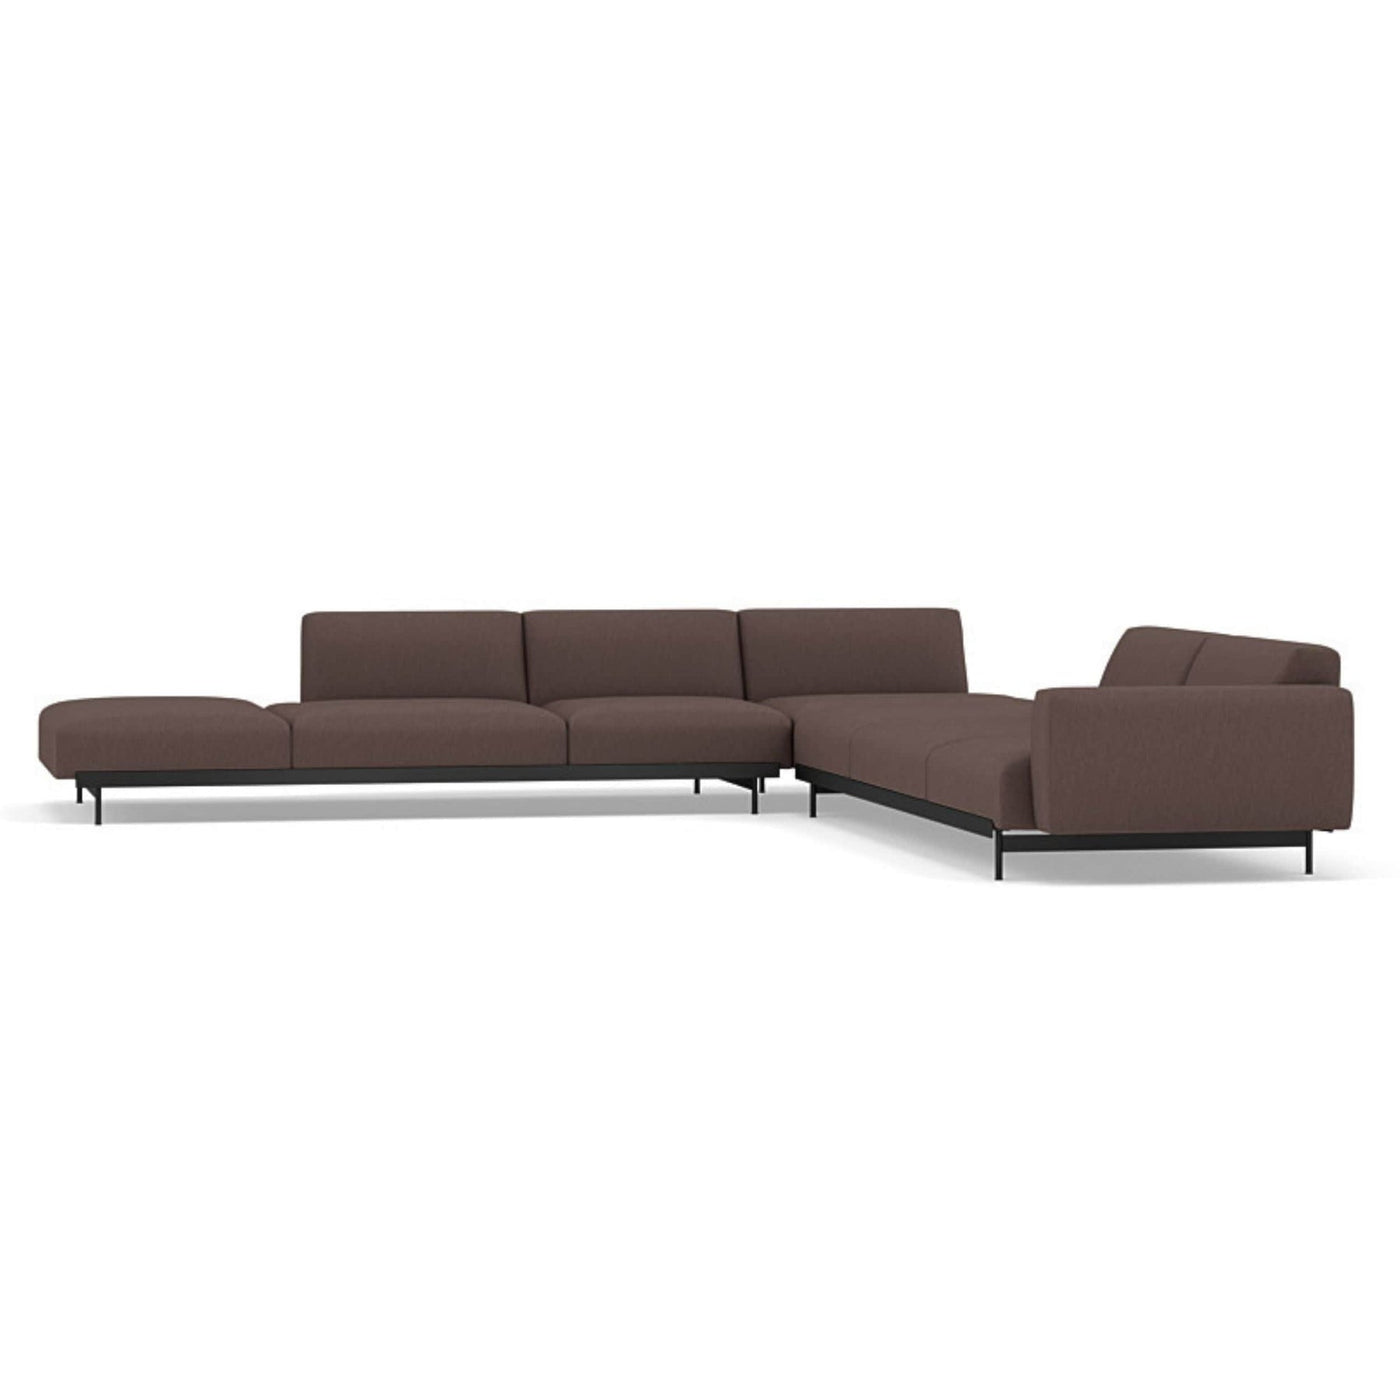 Muuto In Situ Modular Corner Sofa. Made to order  from someday designs. #colour_clay-6-red-brown